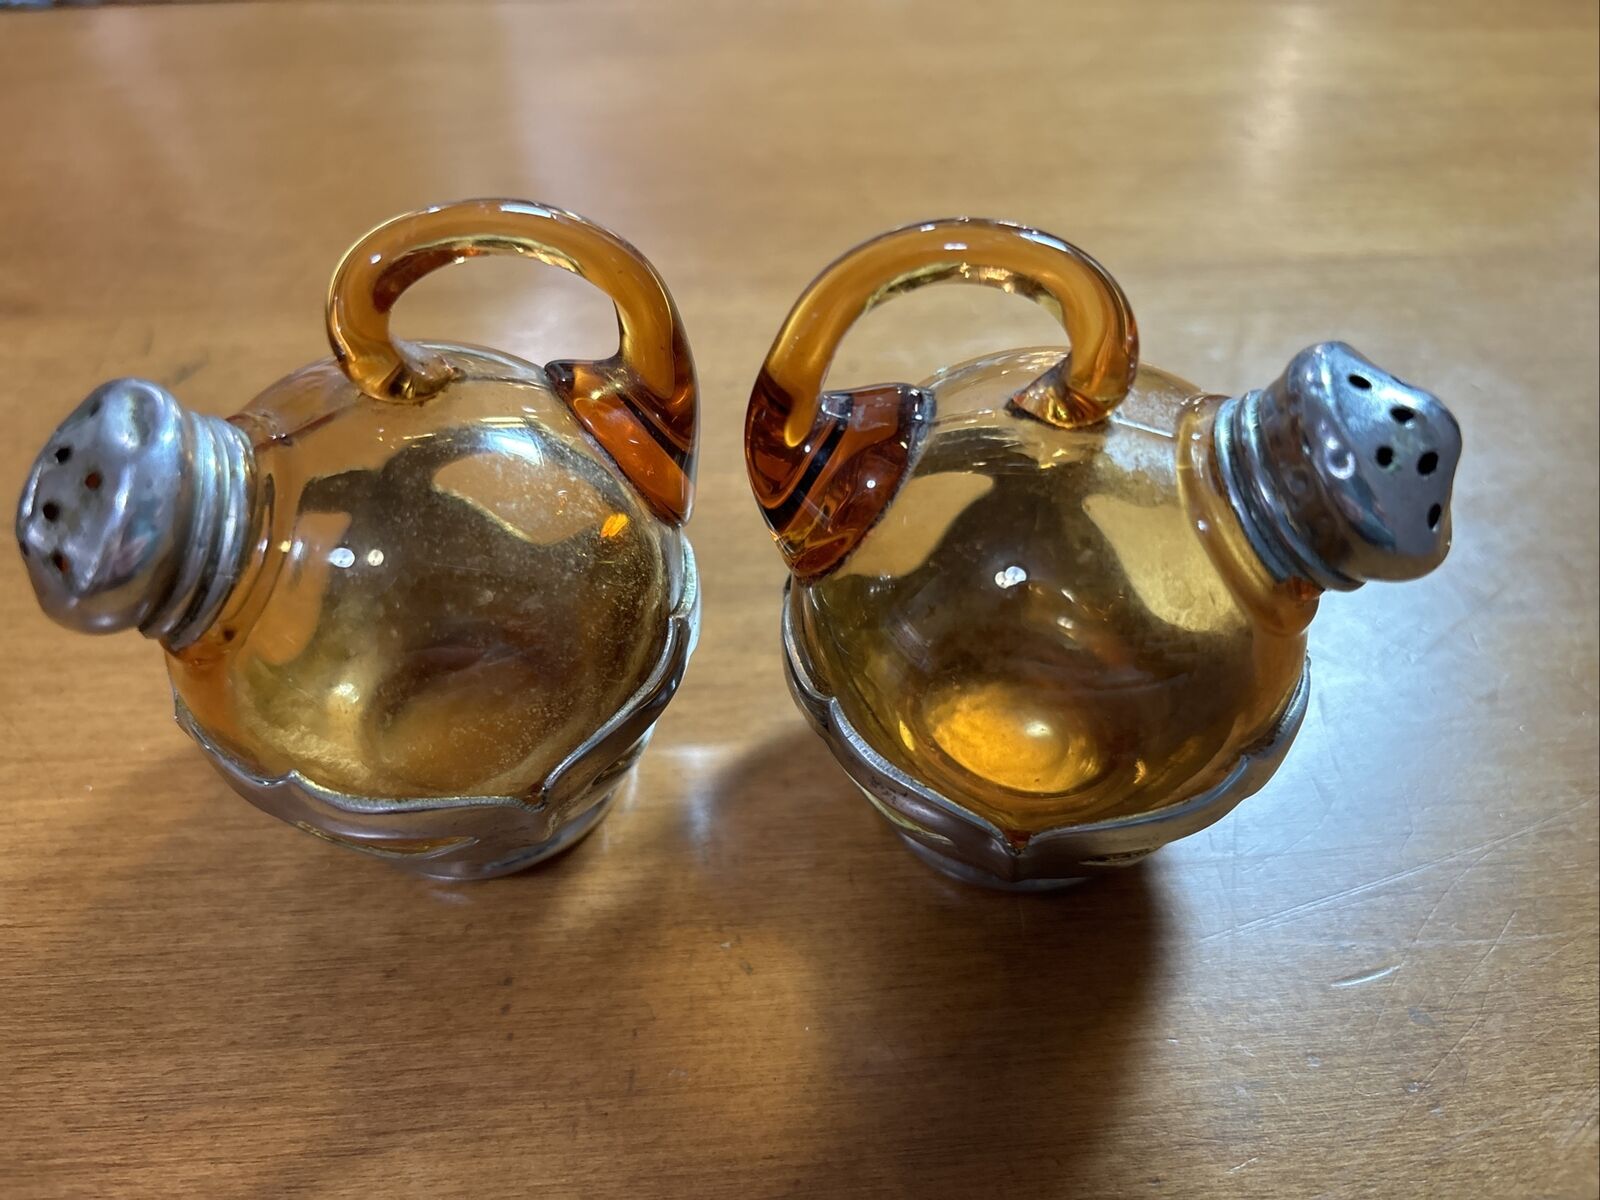 VINTAGE FARBER BROS. AMBER GLASS AND CHROME SALT & PEPPER SHAKERS